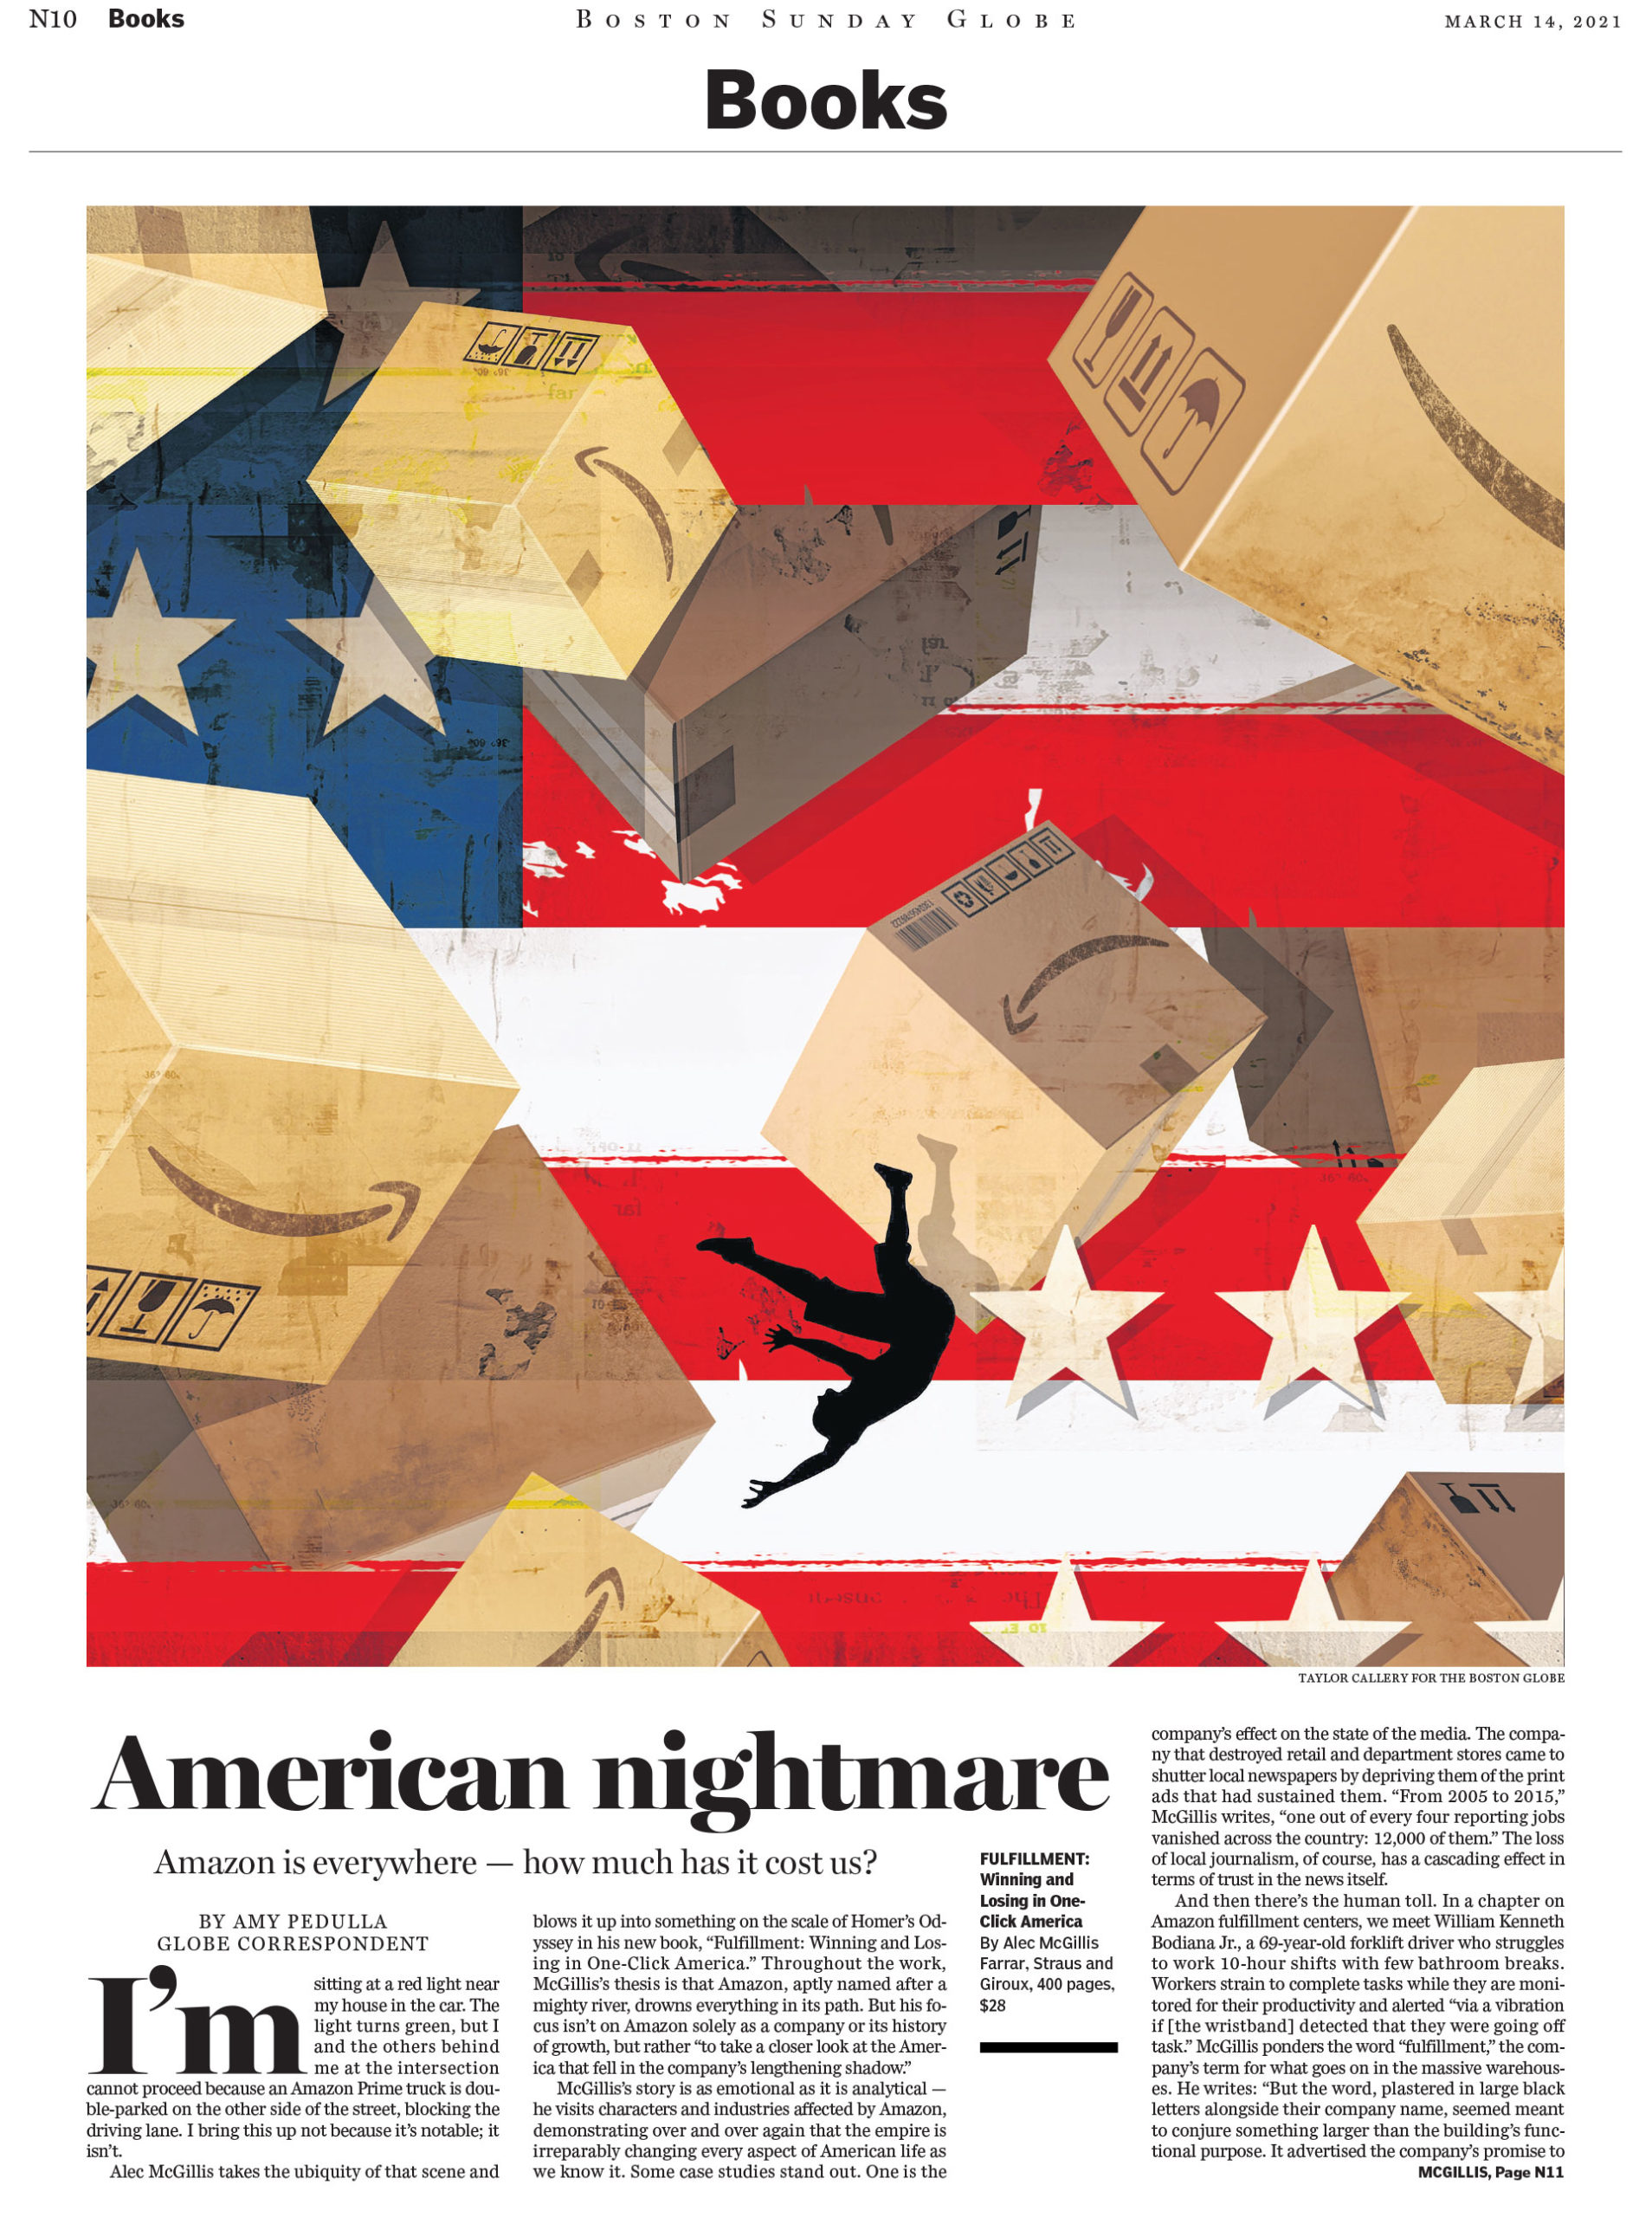 Taylor Callery illustration for The Boston Globe